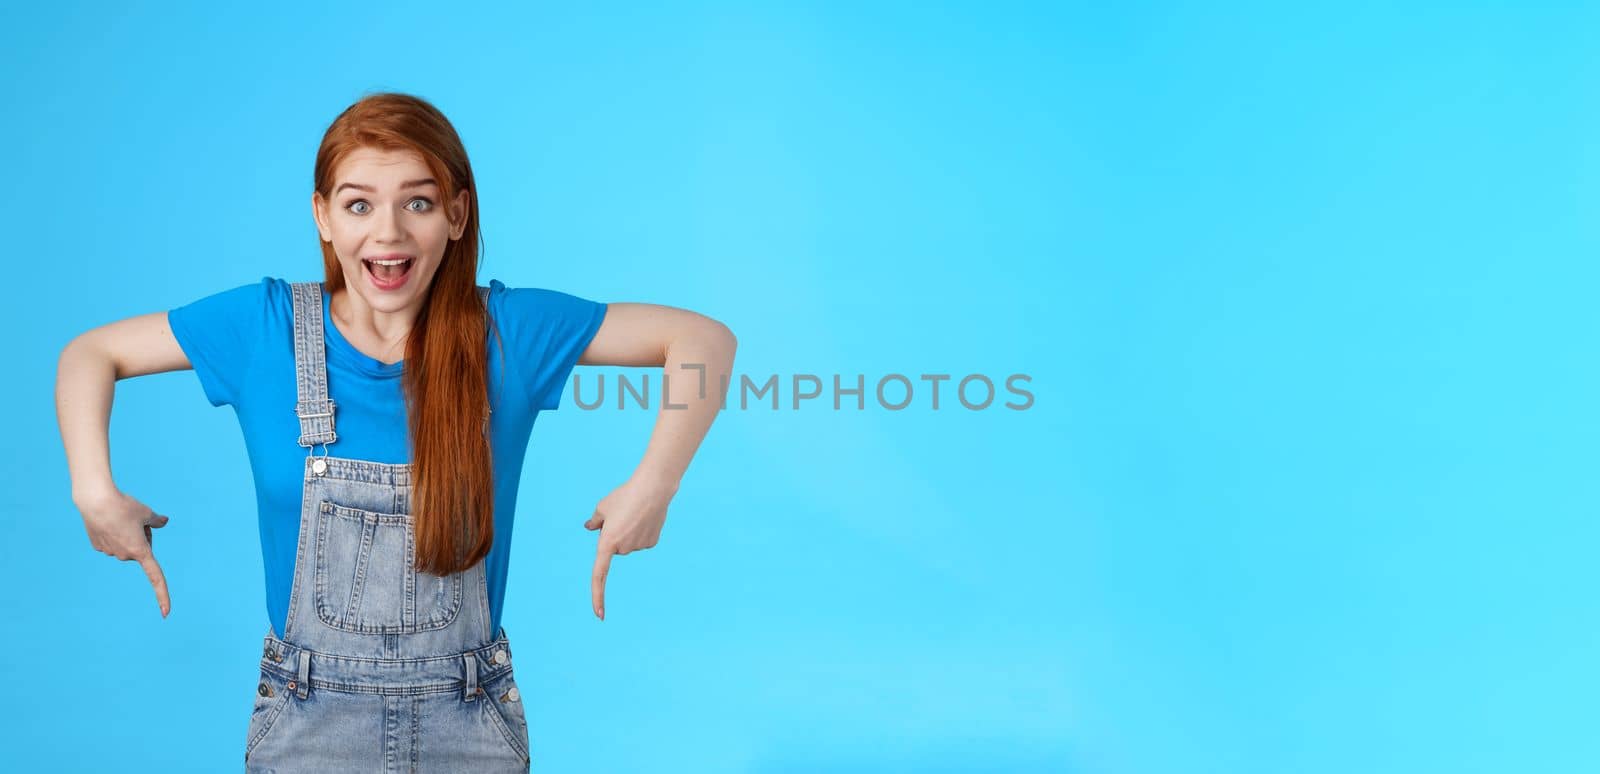 Amused wondered excited cute 20s european woman, pointing down, bottom copy space, look amazed admiration camera, describe amazing product, recommend site, stand blue background. Copy space